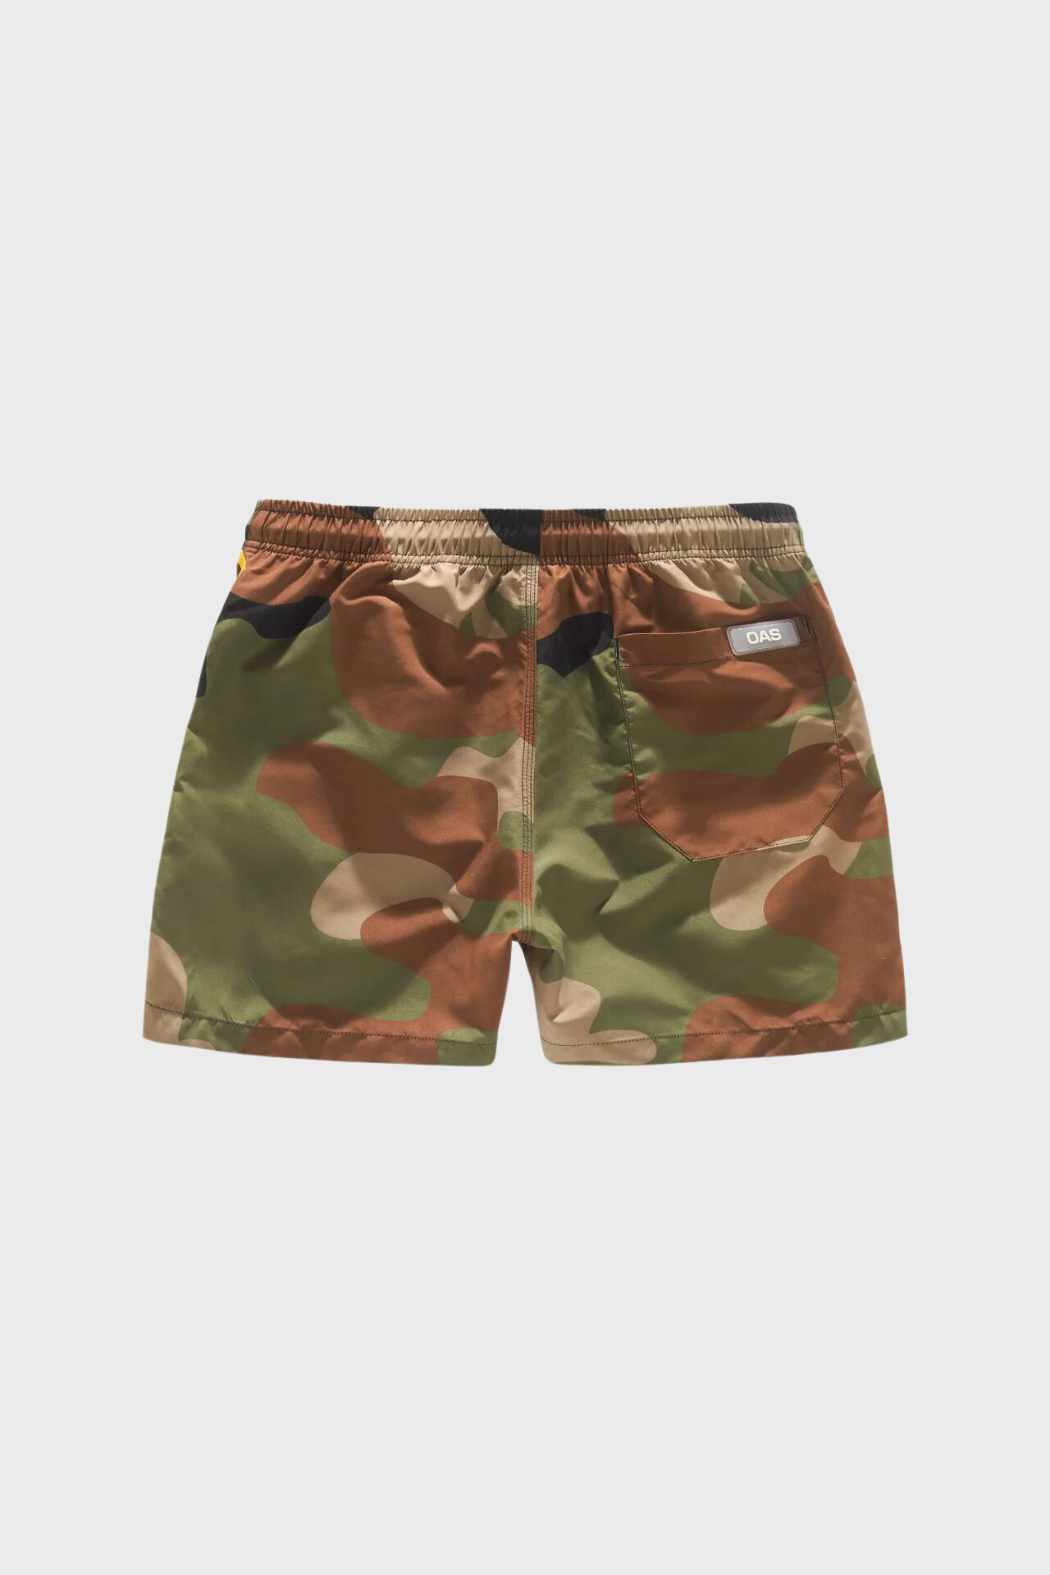 Zig Embroidered Swim Shorts in Green Cammo